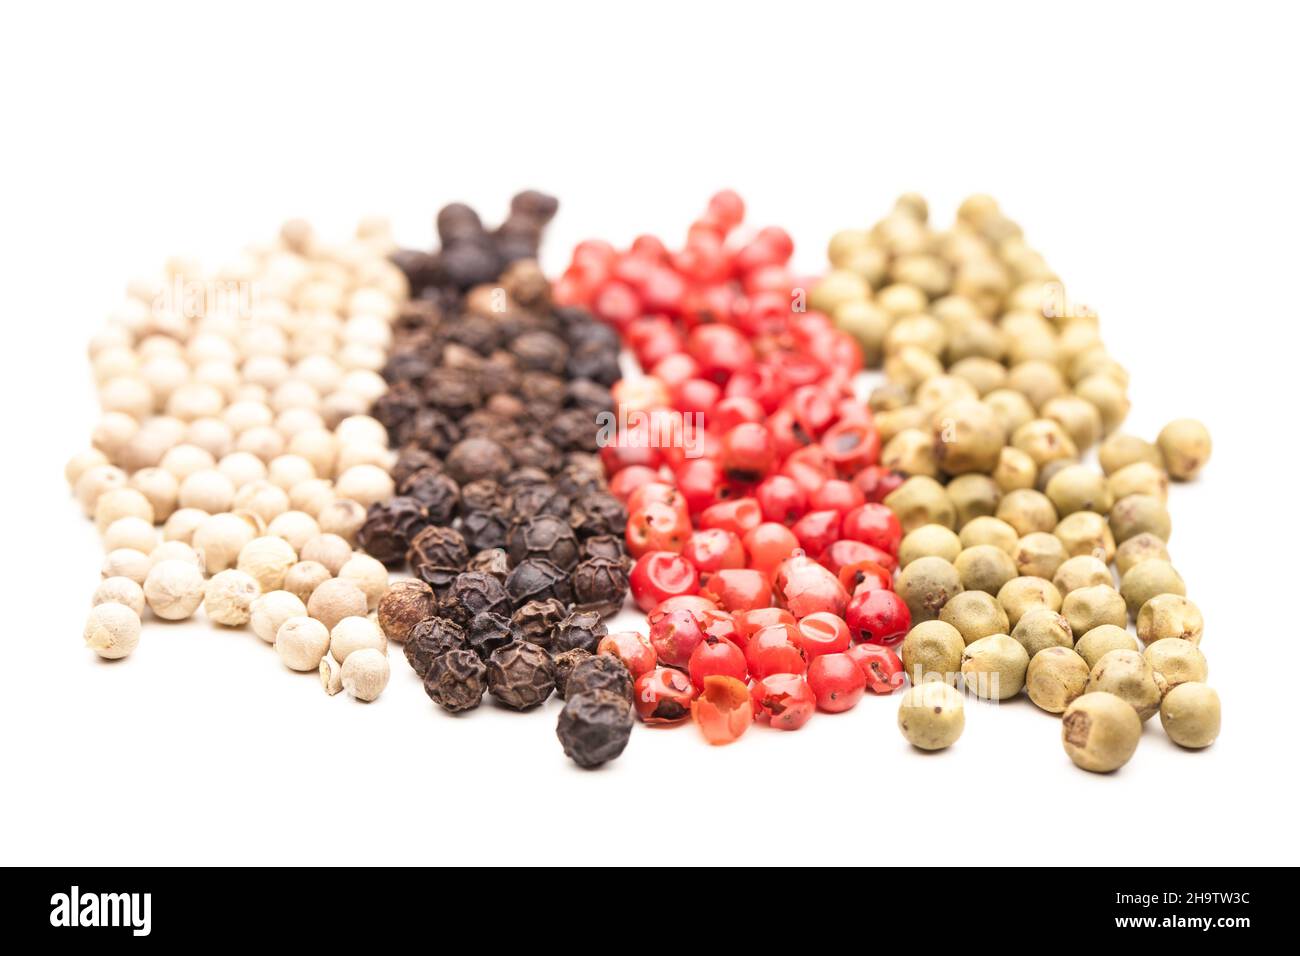 pepper, colorful, different, peppercorns, whole, some, black, white, red, pink, side by side, details, together, line, trace, green, background, close Stock Photo